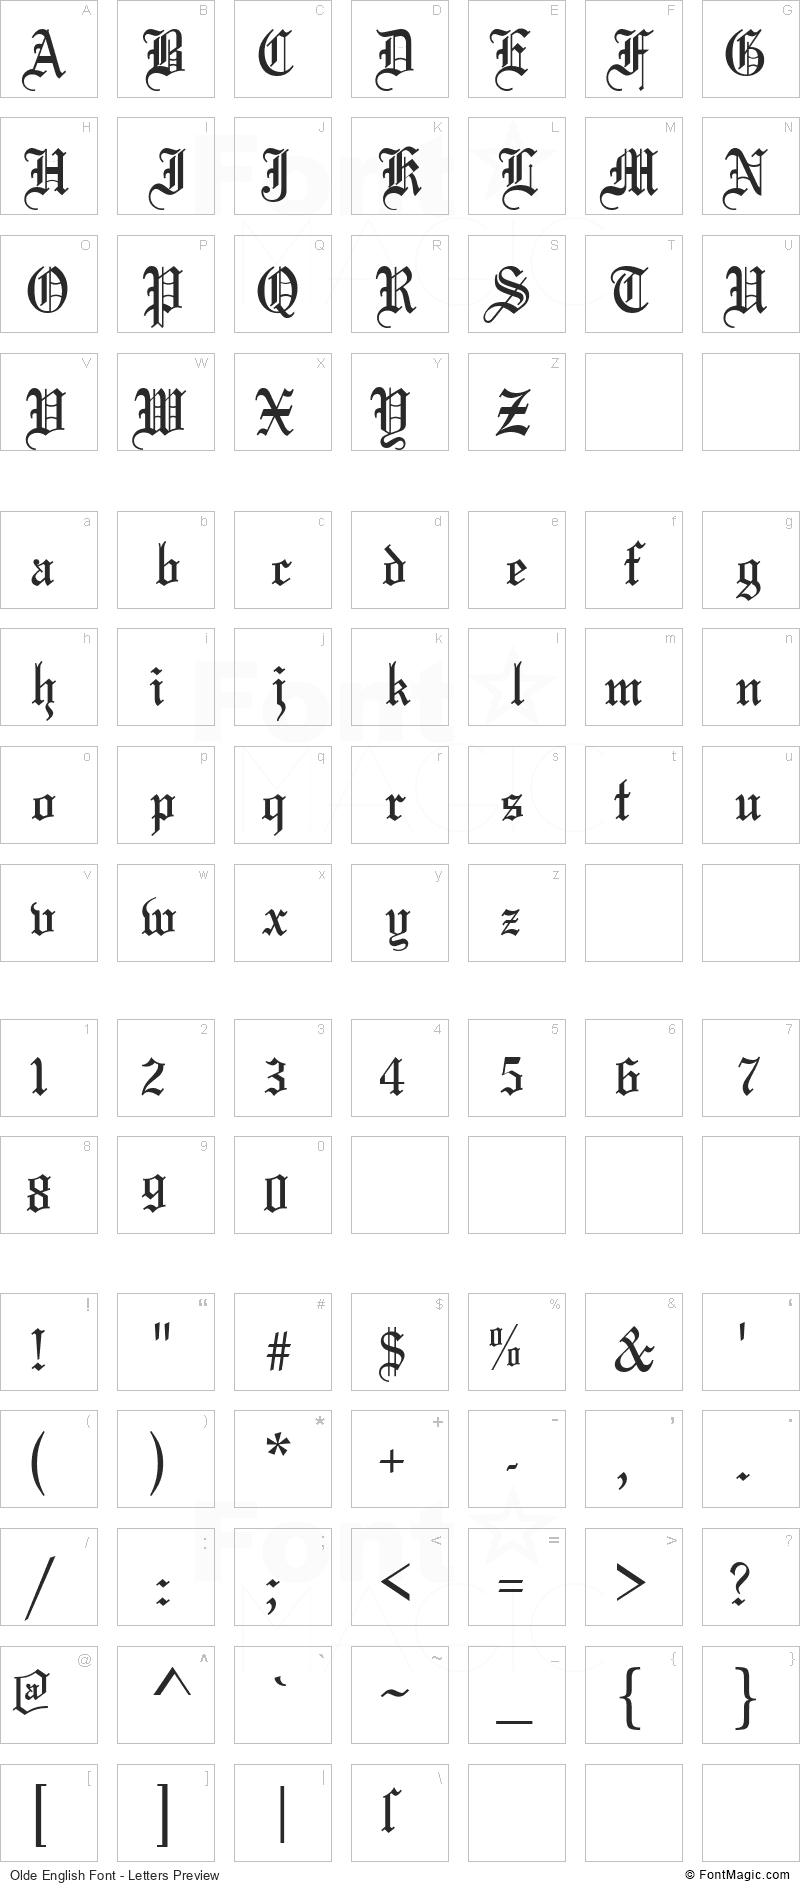 Olde English Font - All Latters Preview Chart